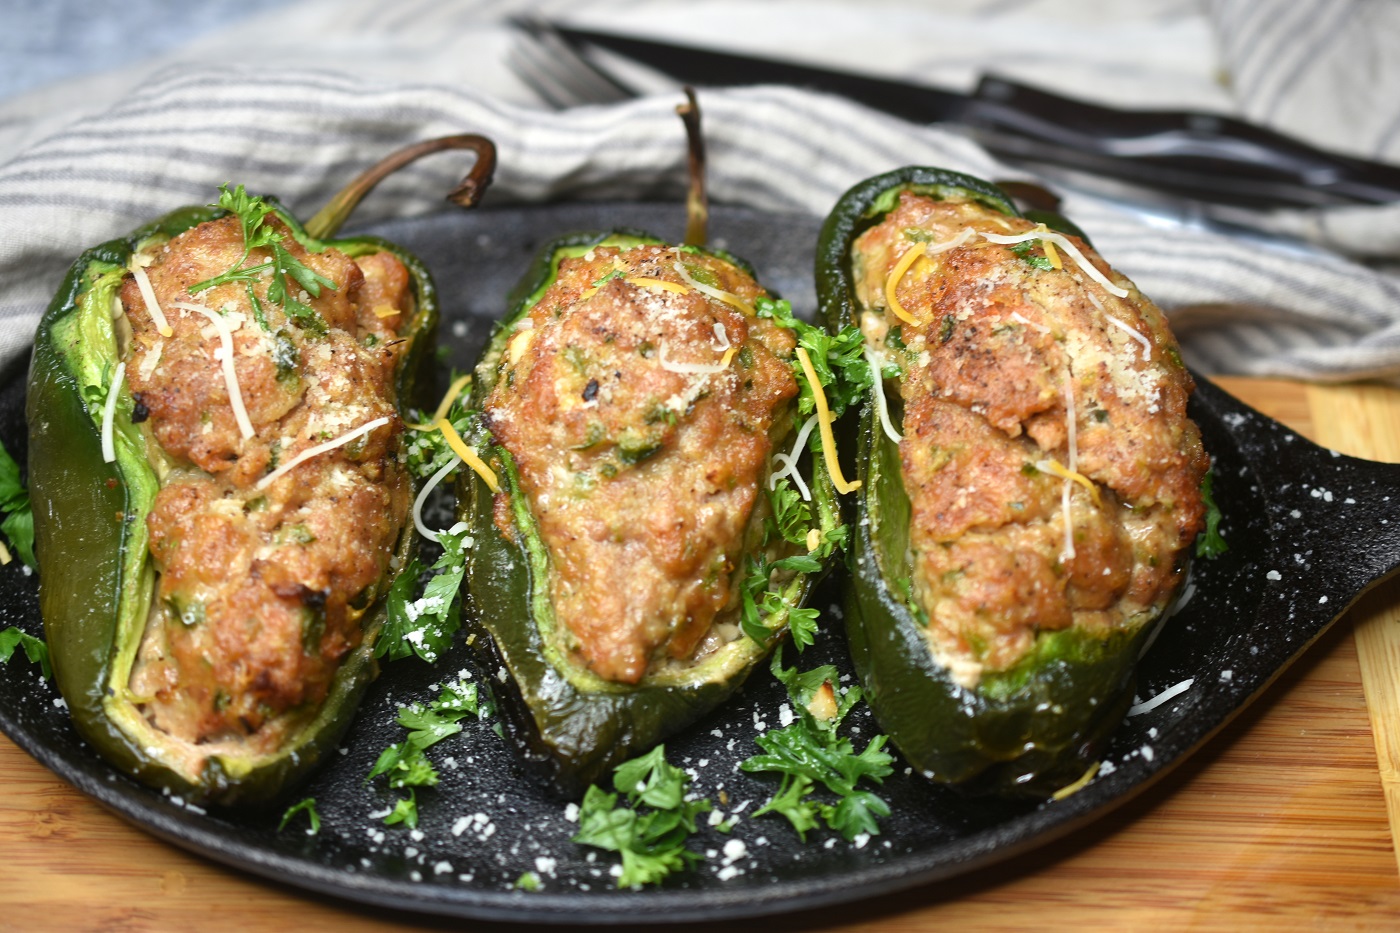 Grilled Meatloaf Stuffed Peppers
BBQ Meatloaf
